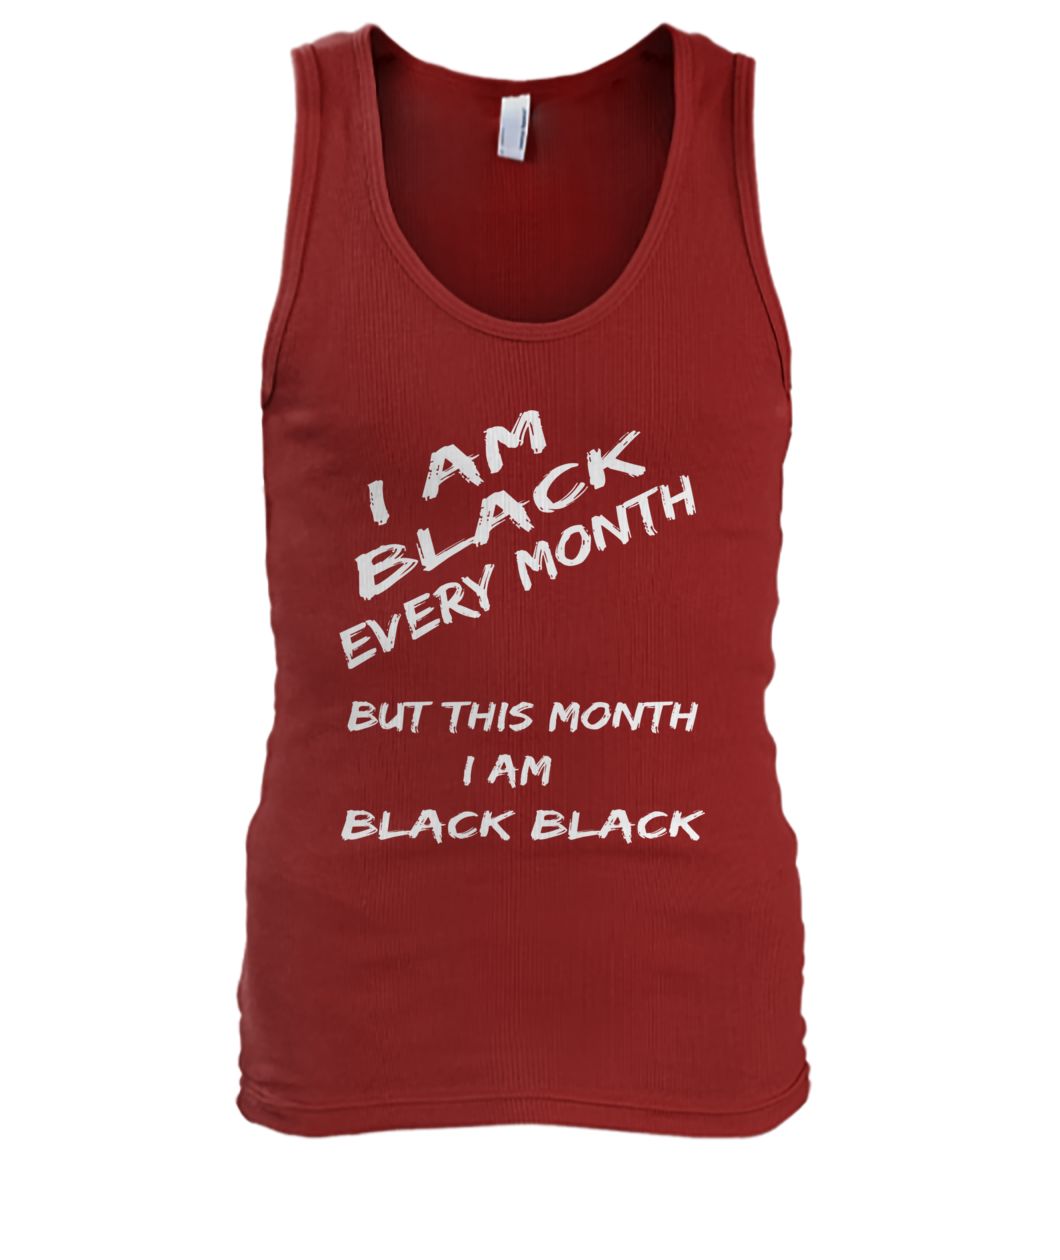 Black history month I am black every month but this month I am black black men's tank top